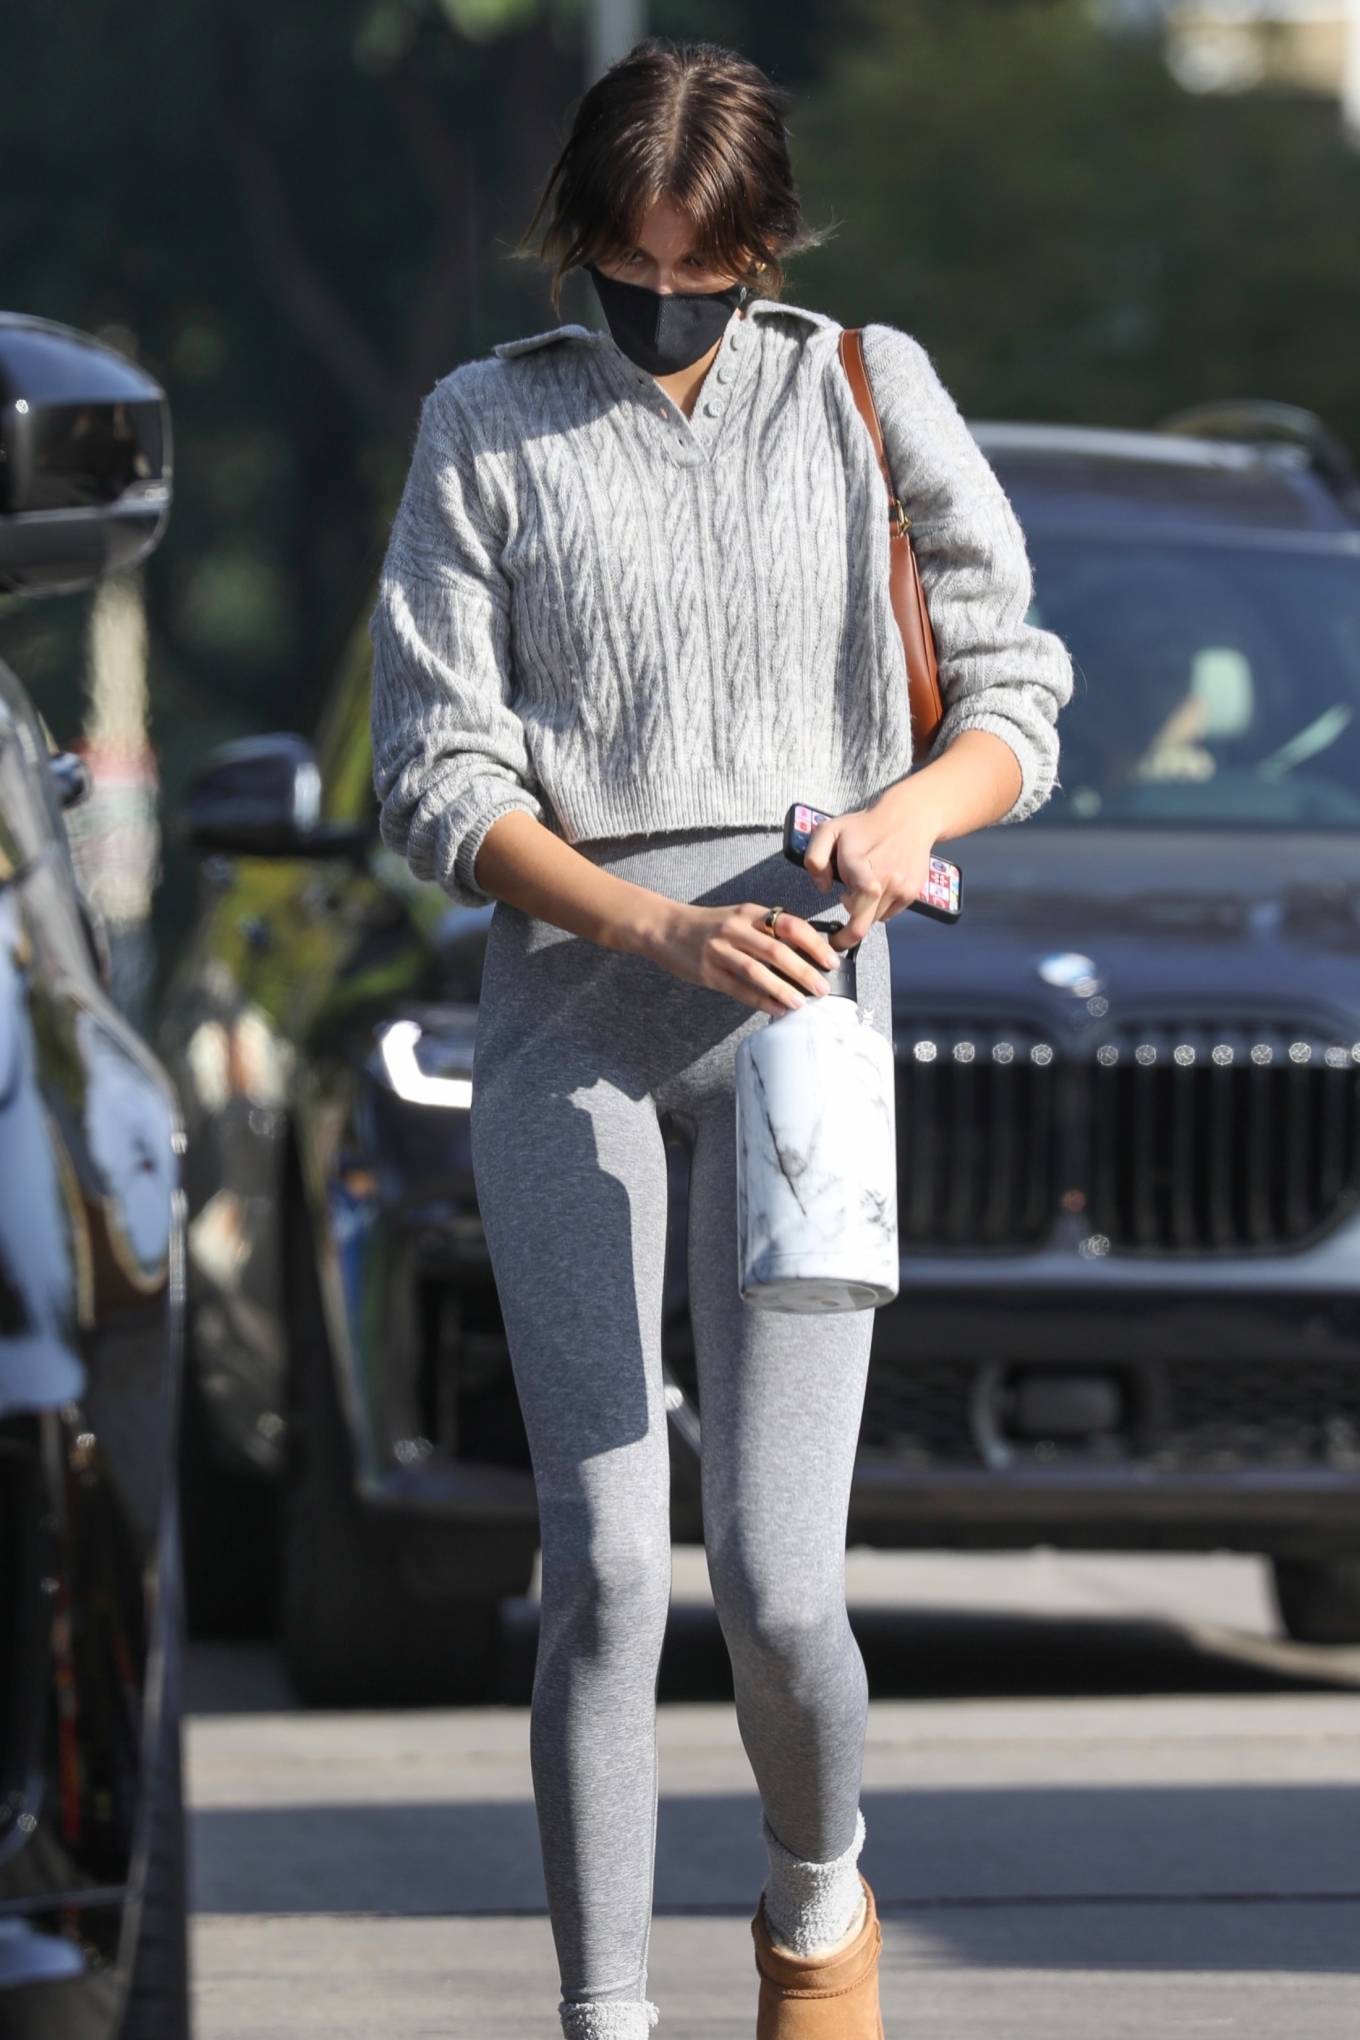 Kaia Gerber - In grey leggings seen after workout in Los Angeles.